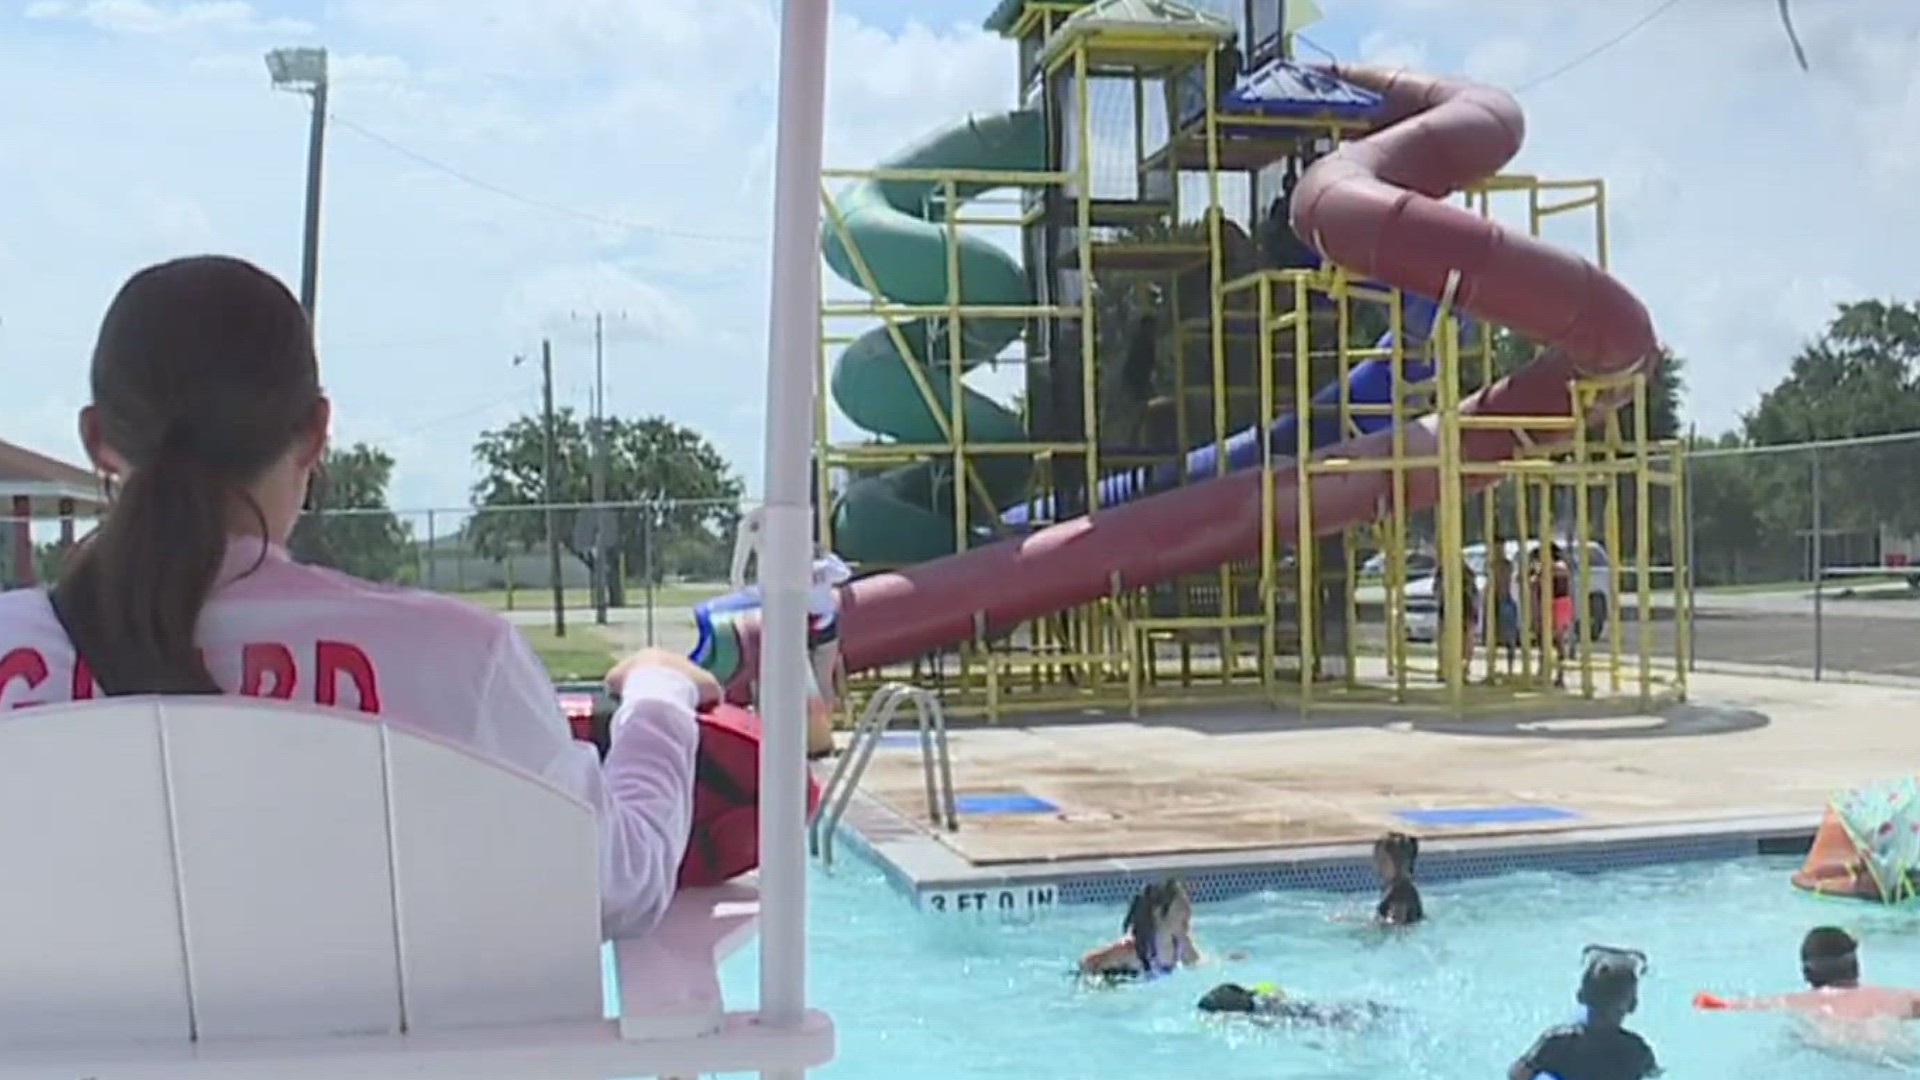 This is Robstown's only public pool. Surrounding communities will be able to create lasting memories.